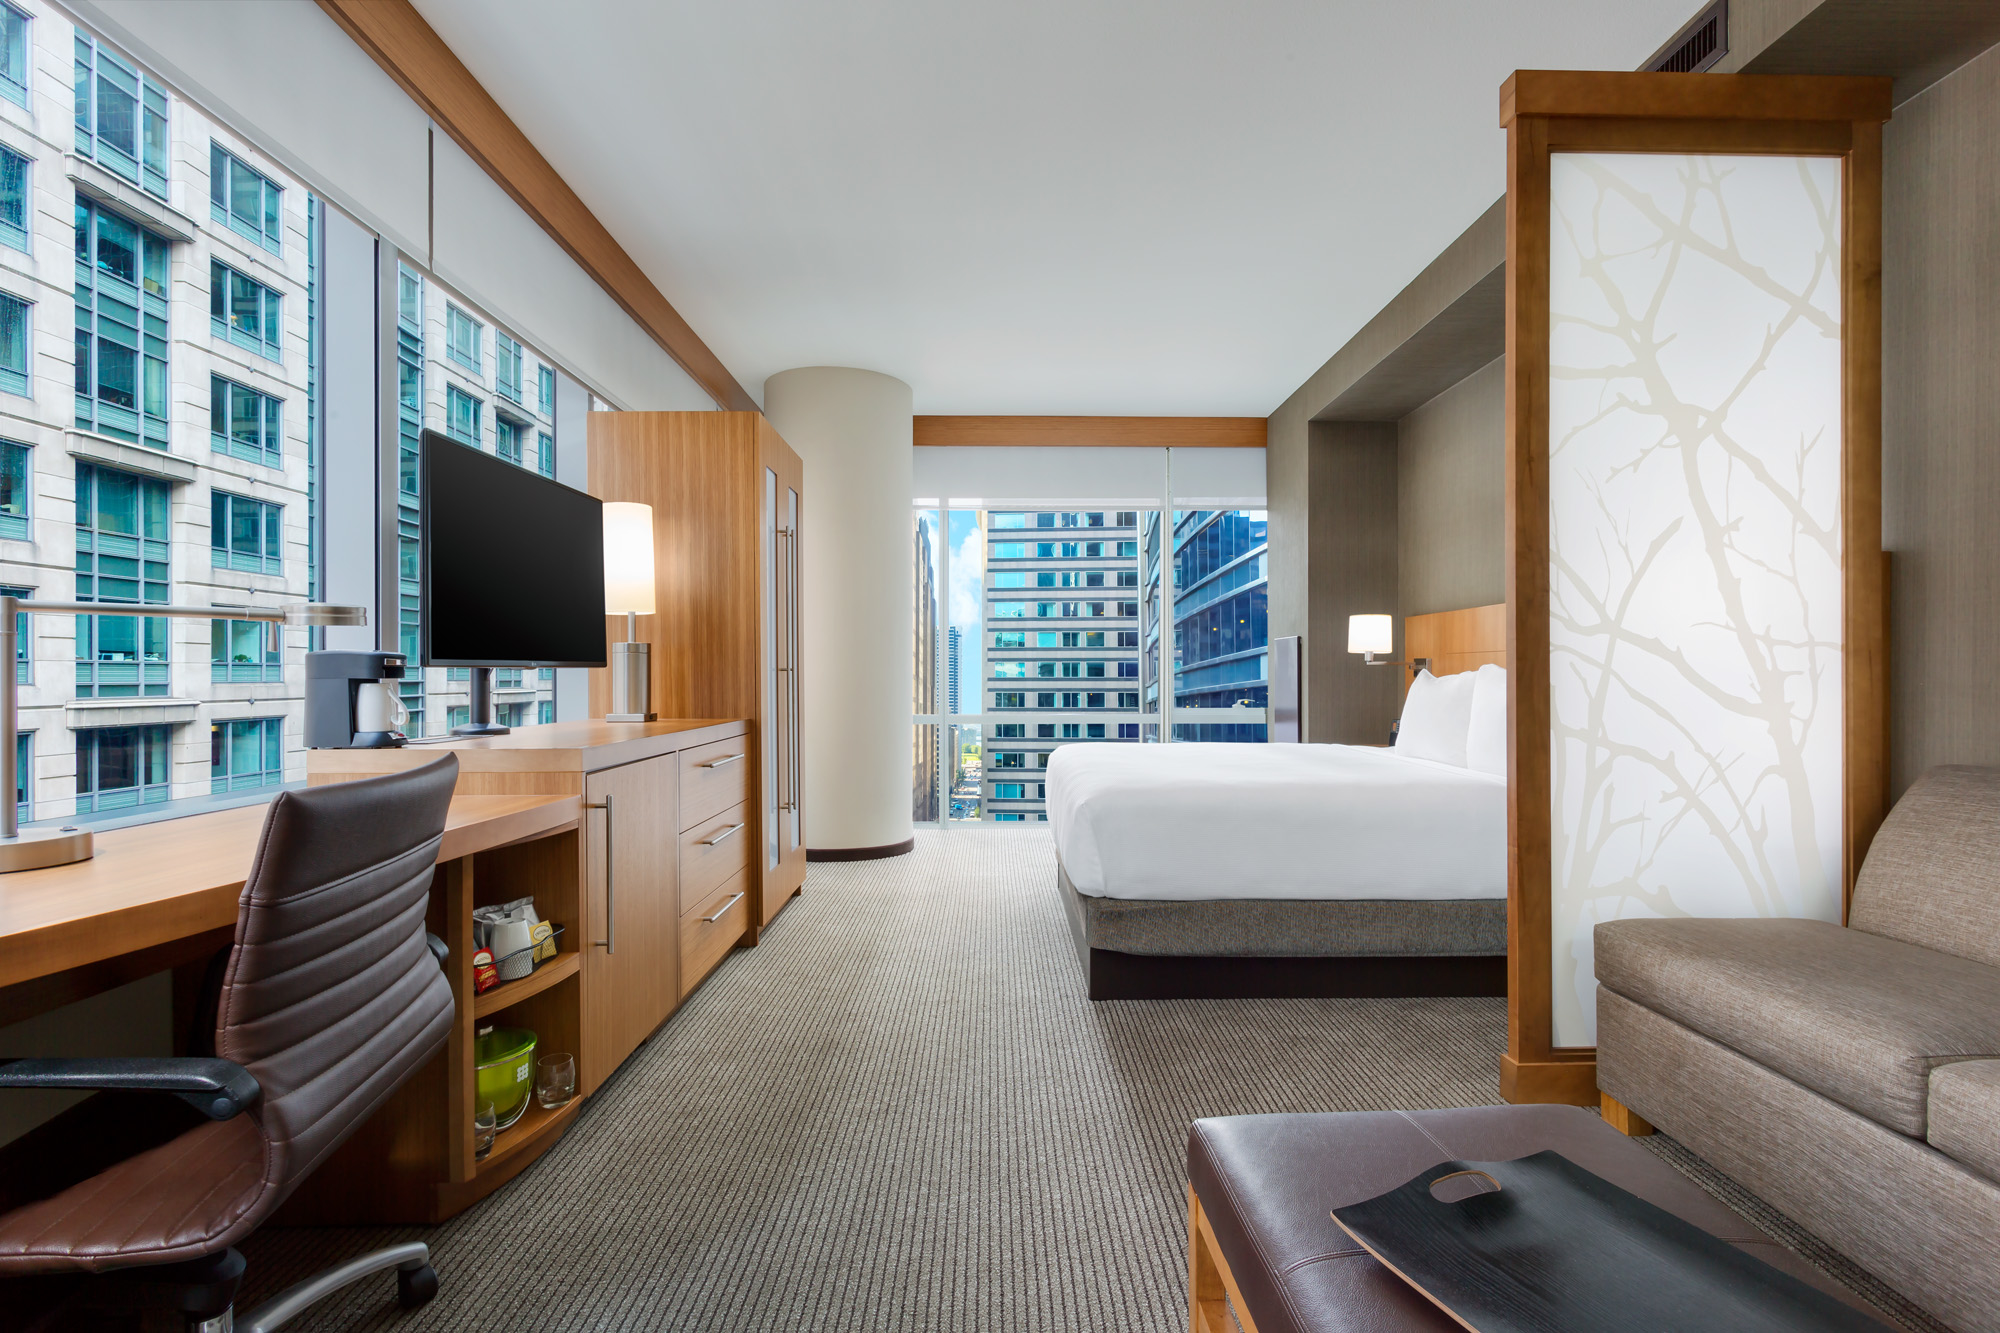 Hyatt Place Chicago Downtown - The Loop King View Room with floor to ceiling windows that provide a beautiful view down Franklin Street. Free Wi-Fi plus mini refrigerator, coffee maker and Cozy Corner sofa sleeper.